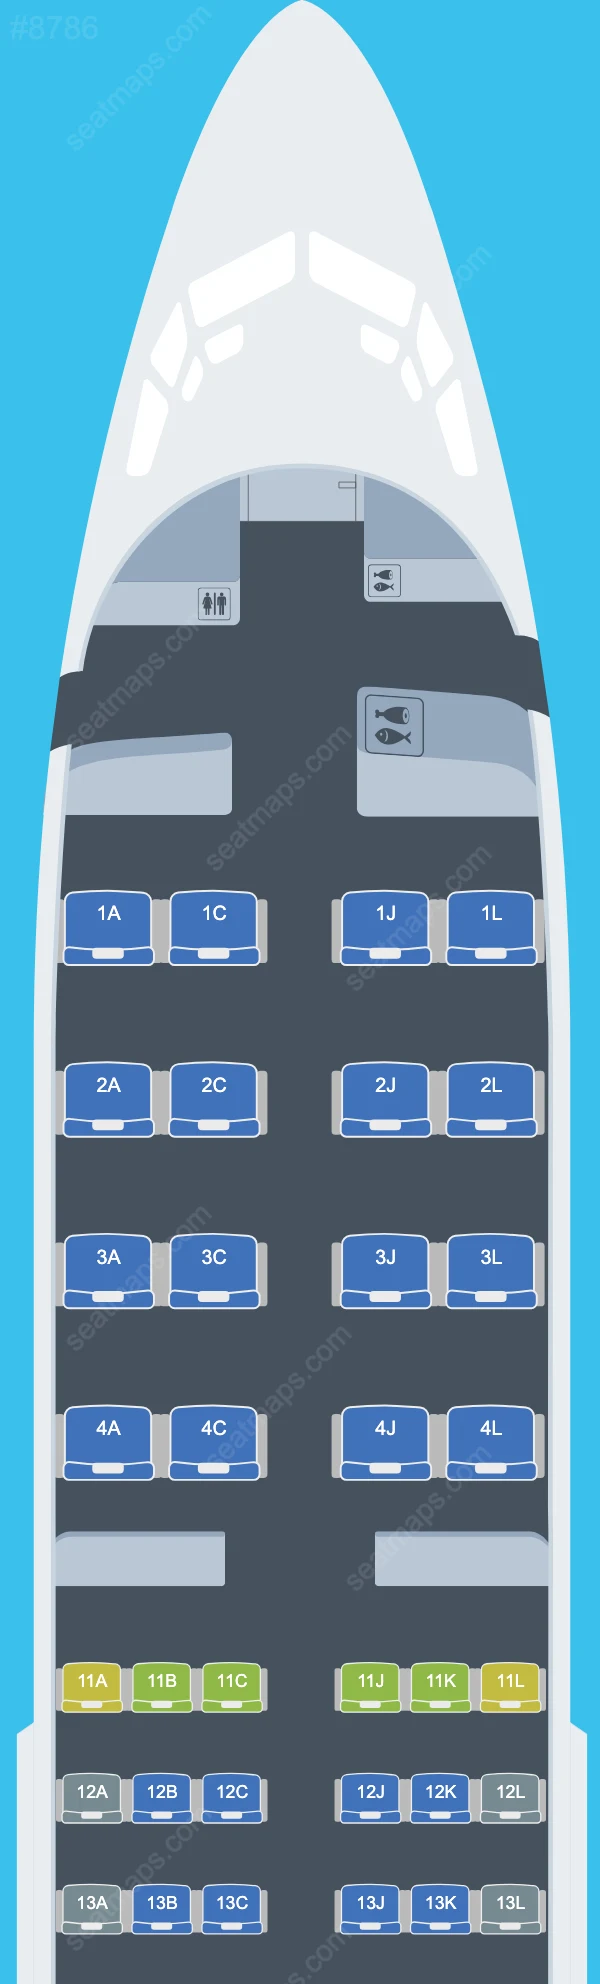 ASKY Airlines Boeing 737 Seat Maps 737-700